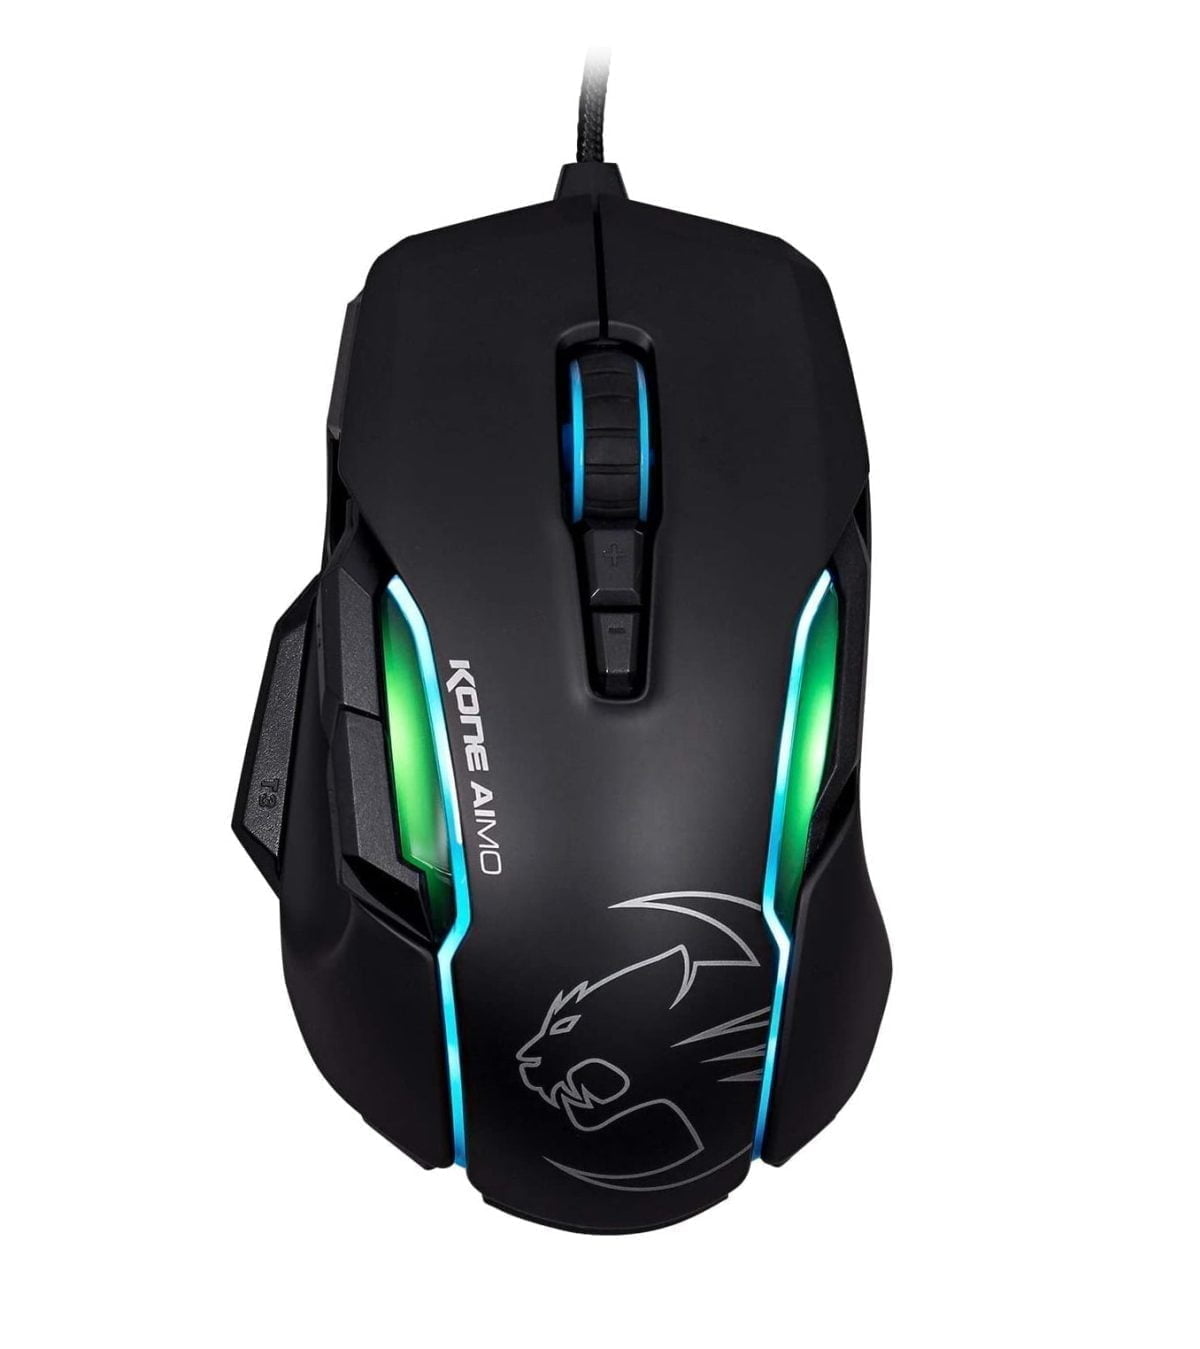 61Lgqdy9Yl. Ac Sl1387 Roccat Https://Youtu.be/Mfk3Bmiiu8C Roccat® Swarm Powered – Comprehensive Driver Suite With A Striking Design And A Stunning Feature Set, The Kone Aimo Channels The Legacy Of Its Predecessor. It Boasts Refined Ergonomics With Enhanced Button Distinction, But What Truly Sets It Apart Is Its Rgba Double Lightguides Powered By The State-Of-The-Art Aimo Intelligent Lighting System. Aimo Is The Vivid Illumination Eco-System From Roccat®. Its Functionality Grows Exponentially Based On The Number Of Aimo-Enabled Devices Connected. It Also Reacts Intuitively And Organically To Your Computing Behavior. Eliminating The Need For Configuration, It Presents A State-Of-The-Art Lighting Scenario Right Out Of The Box, For A Completely Fluid, Next-Gen Experience. The Kone Aimo Features A Tri-Button Thumb Zone For A New And Even Greater Level Of Control. It Includes Two Wide Buttons Suitable For All Hand Sizes, Plus An Ergonomic Lower Button Set To Easy-Shift[+]™ By Default. Easy-Shift[+]™ Is The World-Famous Button Duplicator Technology That Lets You Assign A Secondary Function To The Mouse'S Buttons. It'S Easy To Program And Has Options For Simple Commands And Complex Macros. Roccat - ماوس ألعاب مخصص ذكي من Kone Aimo Rgba (أسود) 23 مفتاحًا قابلًا للبرمجة ، مصمم في ألمانيا